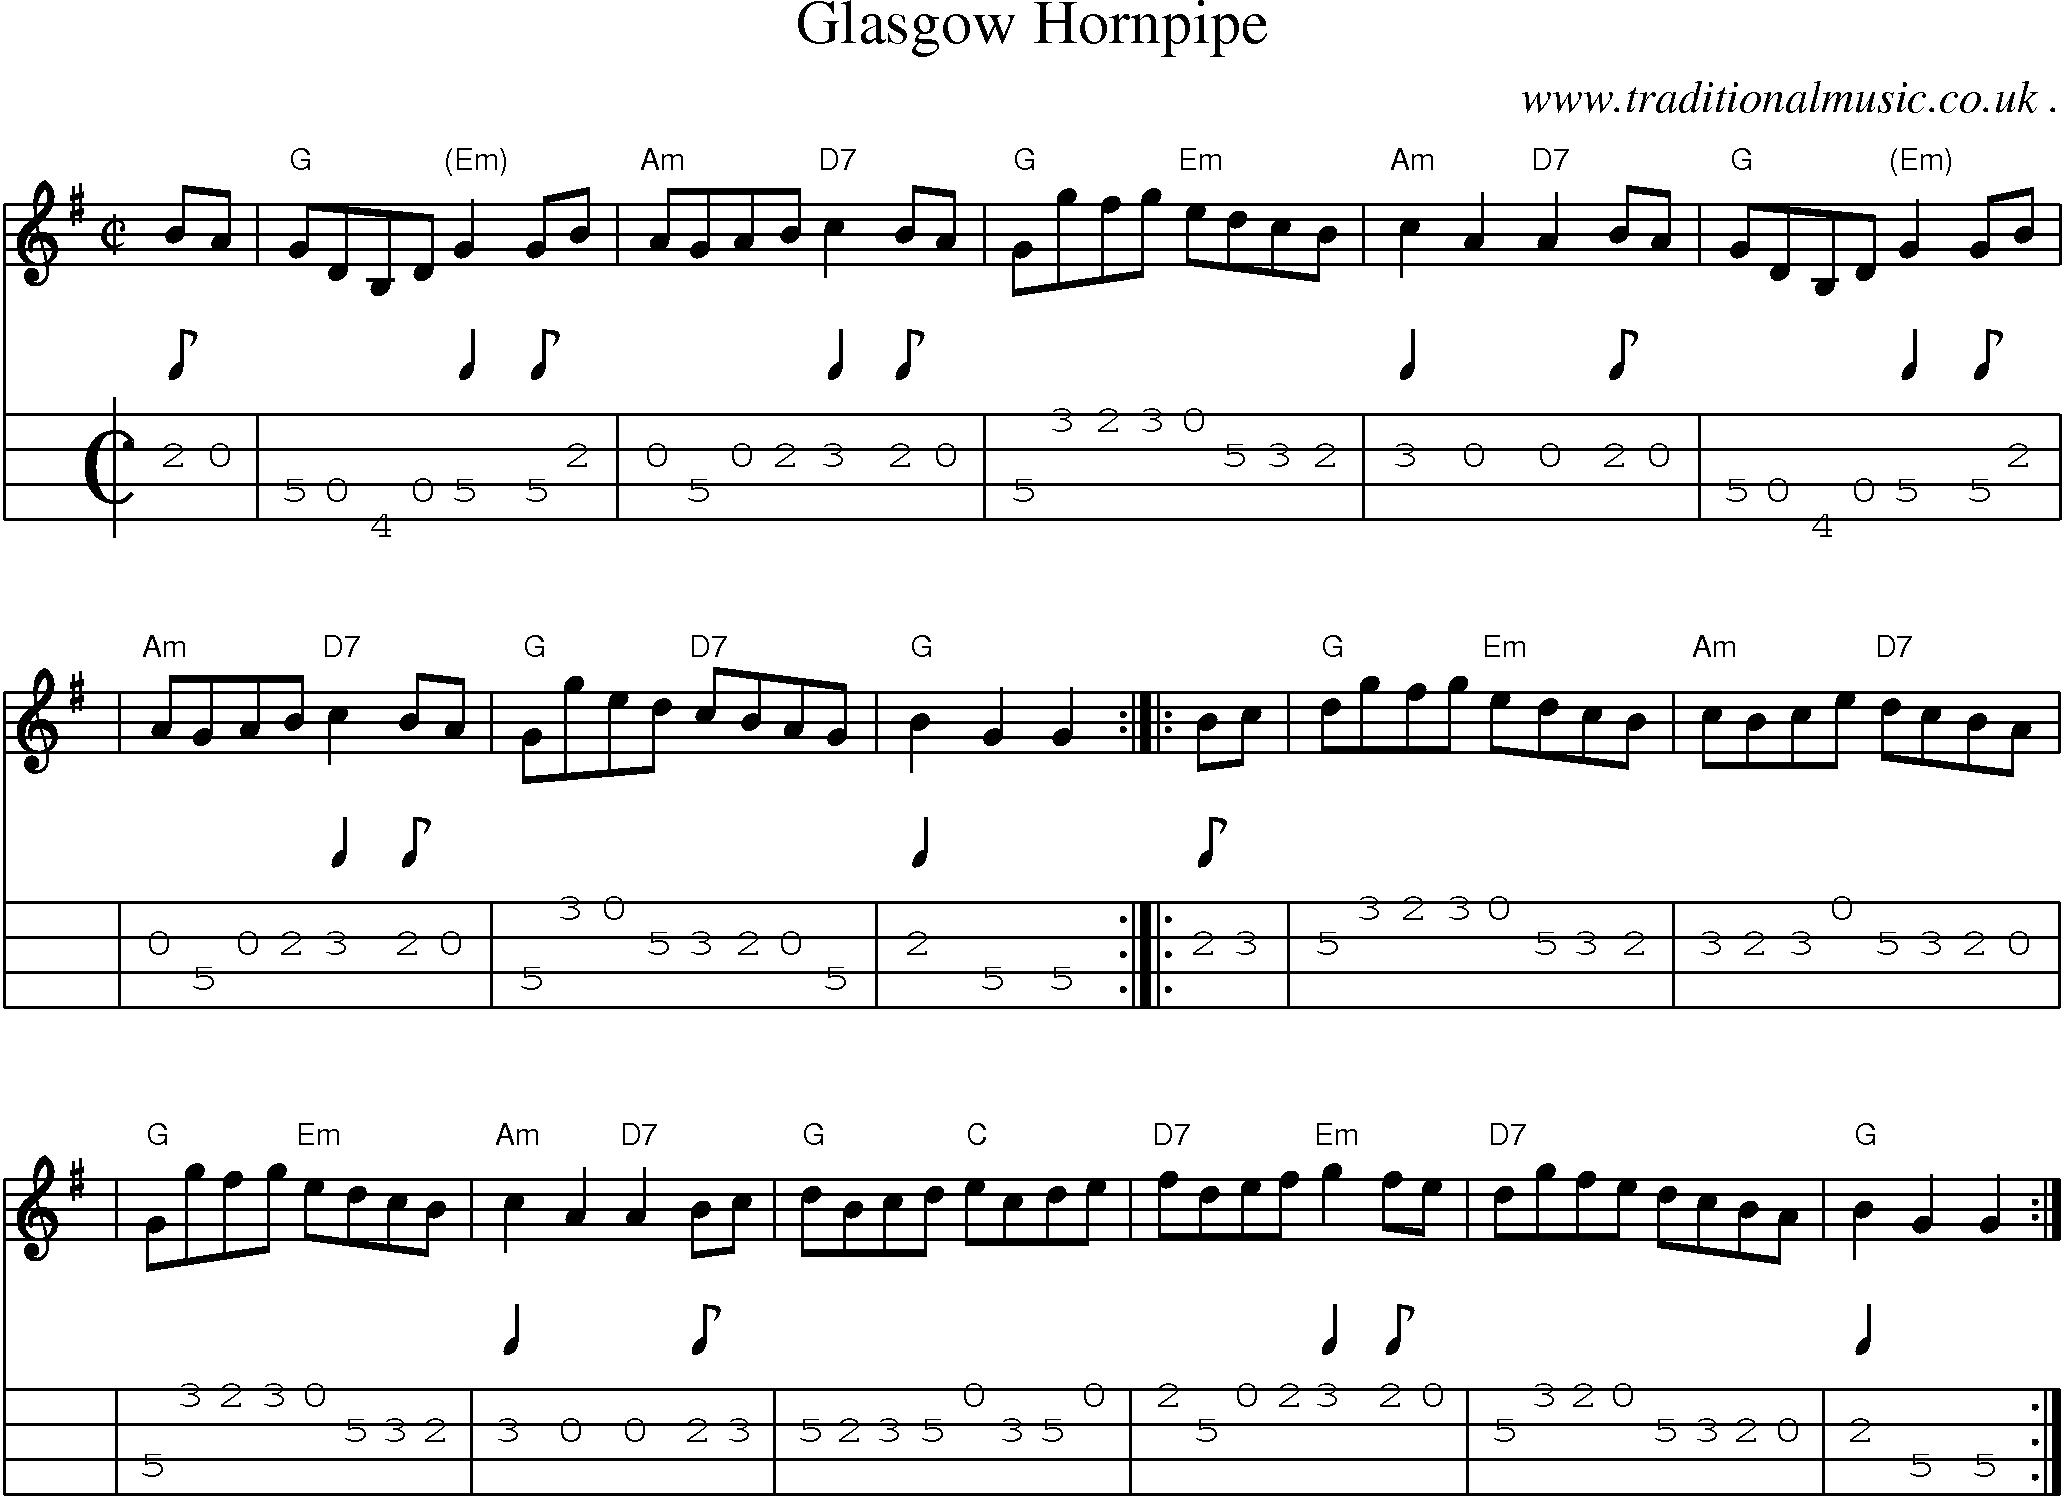 Sheet-music  score, Chords and Mandolin Tabs for Glasgow Hornpipe